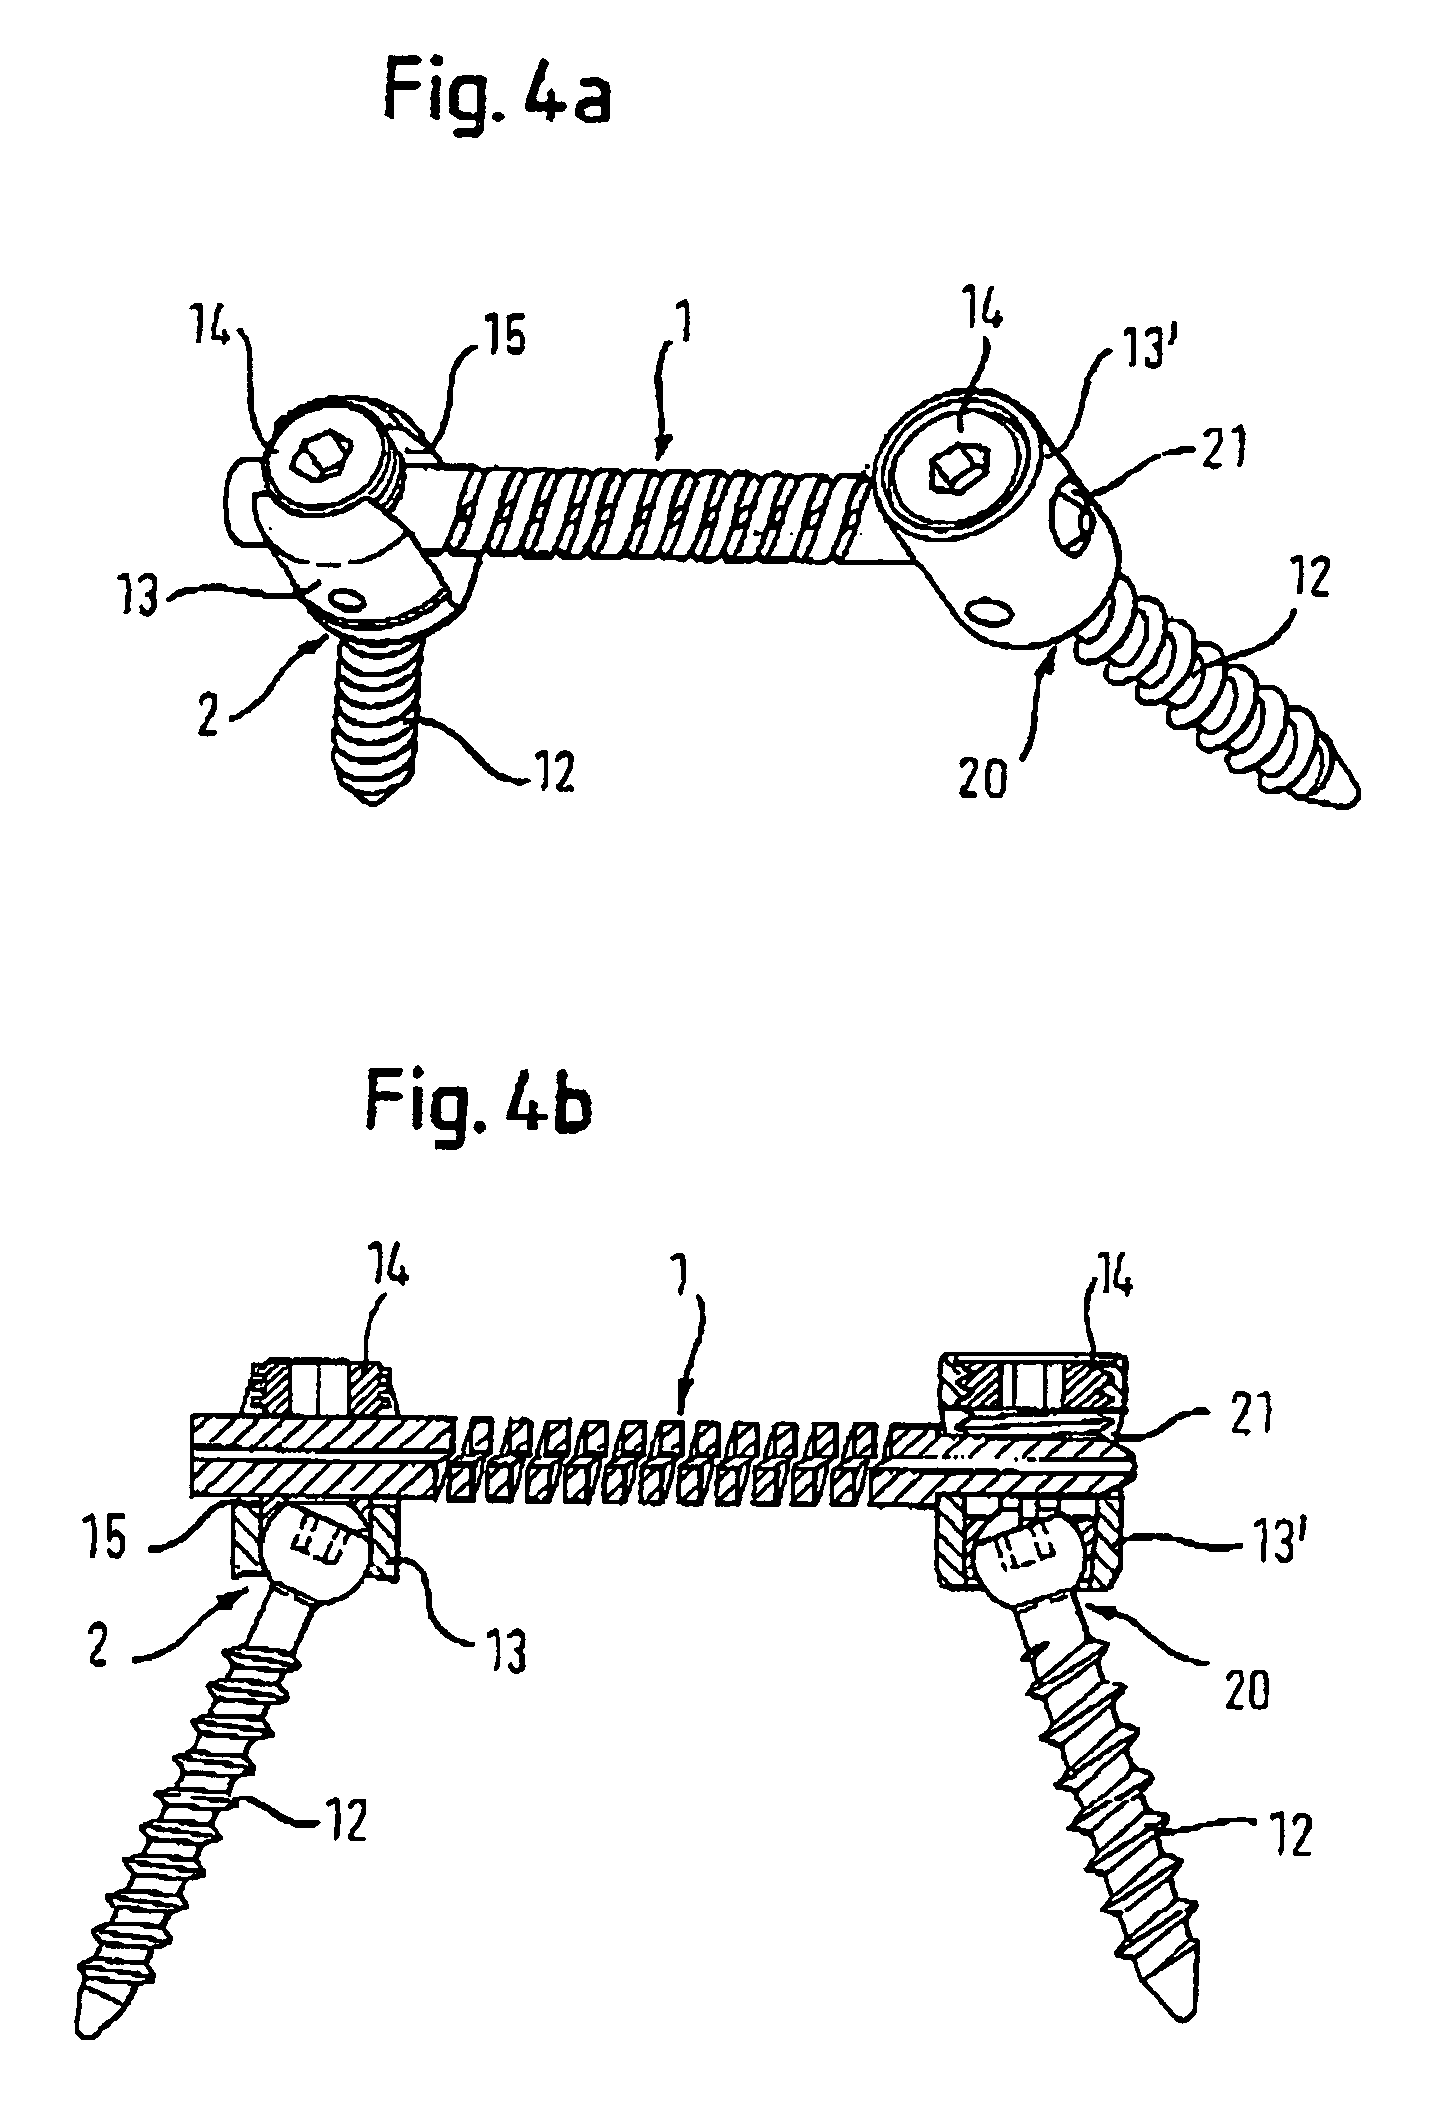 Rod-shaped implant element with flexible section